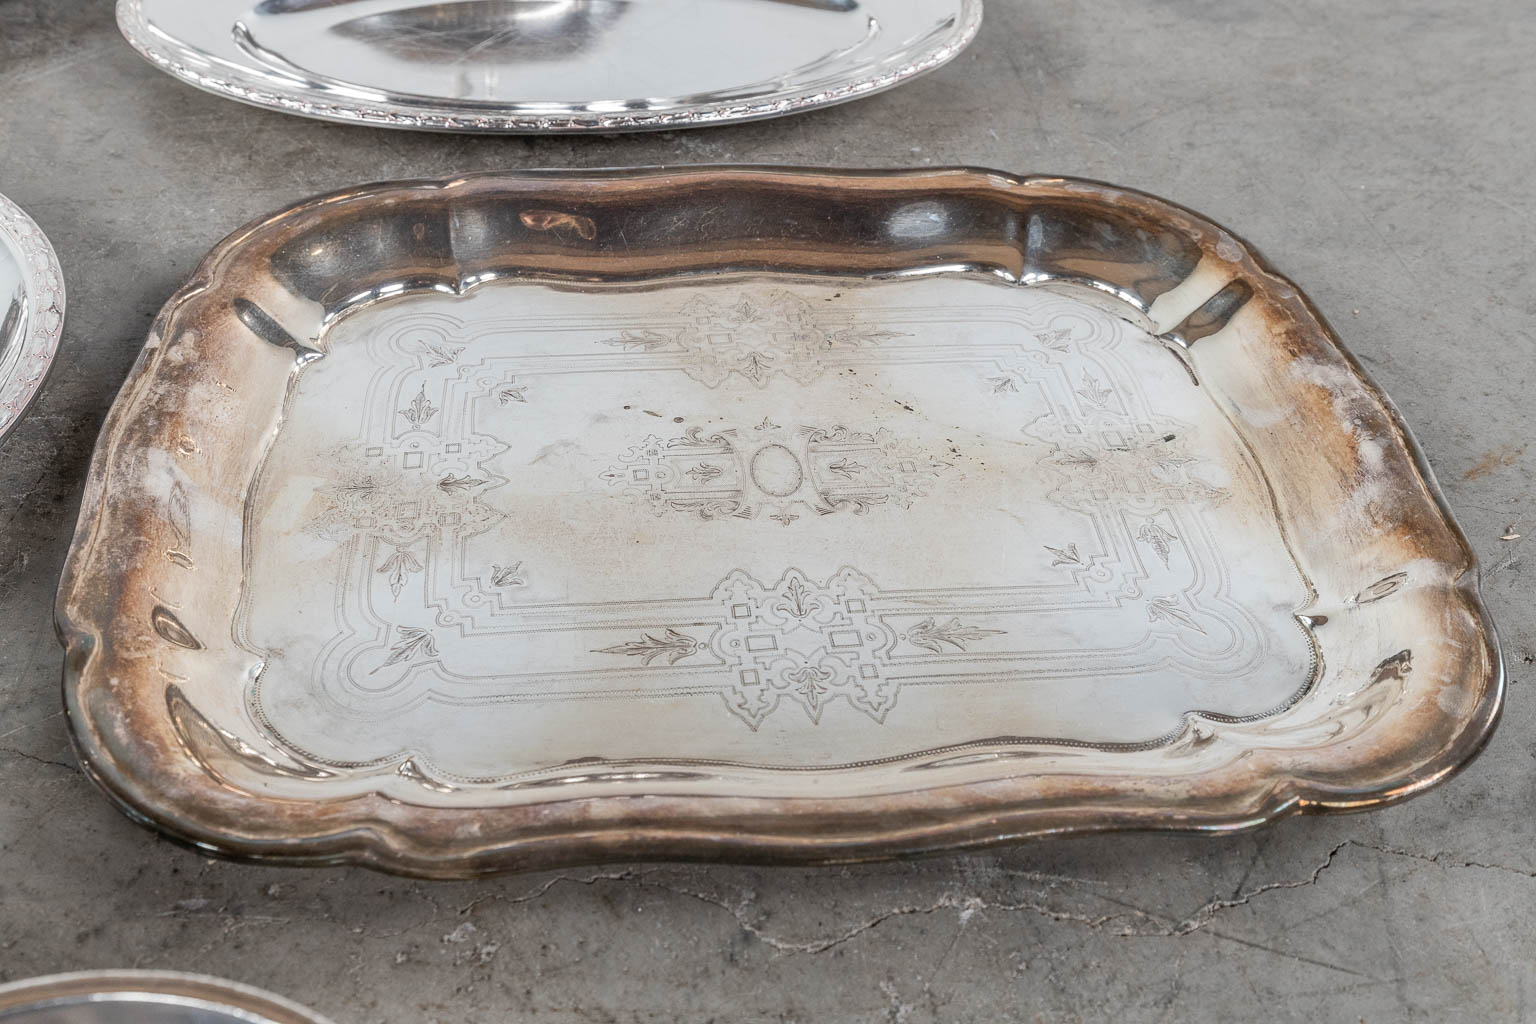 A large collection of table accessories and serving ware, silver-plated metal. (L: 32 x W: 48 cm)